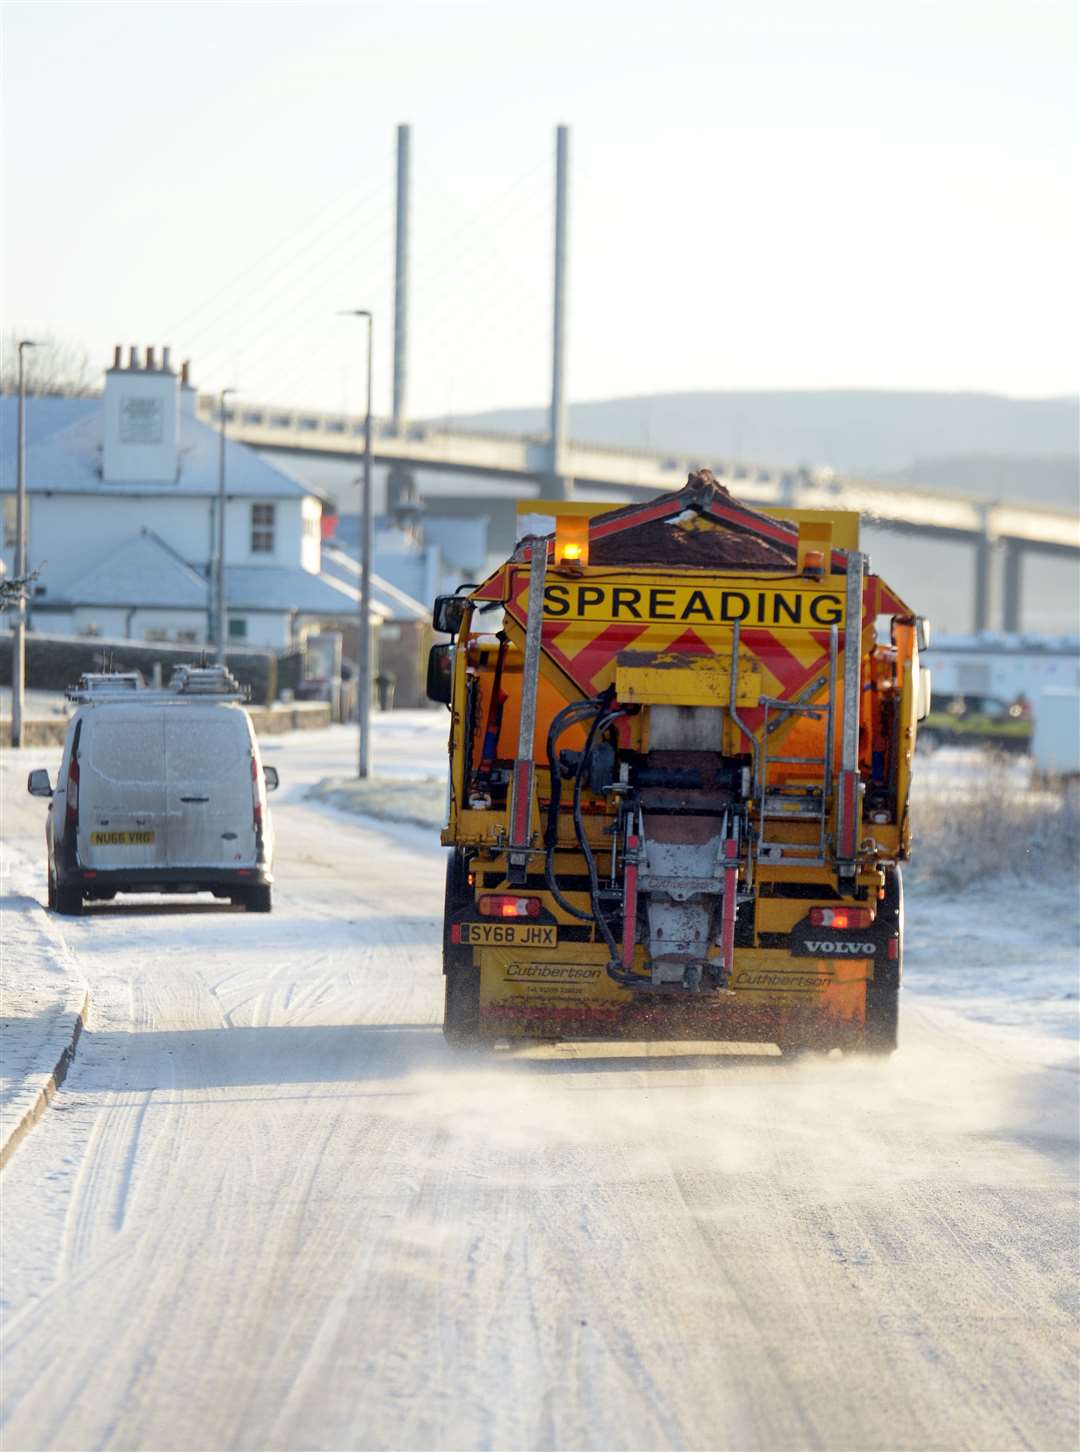 A wintry scene as gritter works near Inverness.